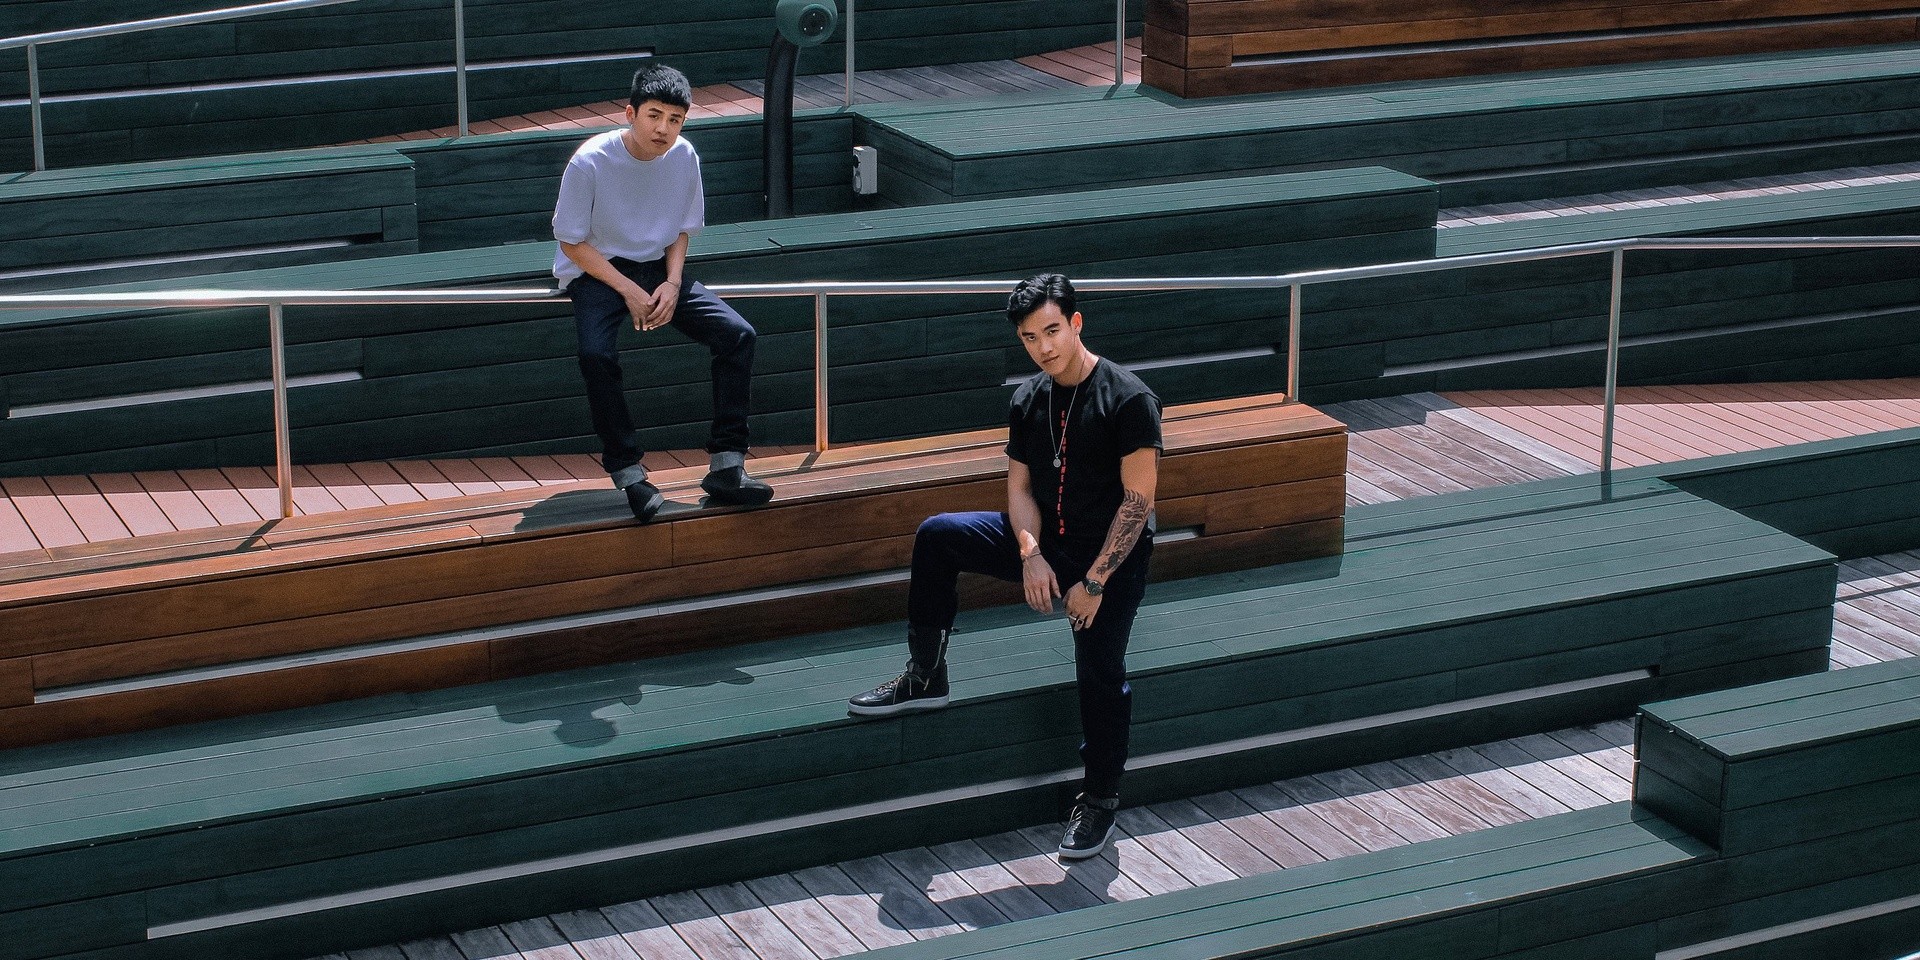 Gentle Bones and MYRNE talk B4NGER PROJECT, their joint album out today